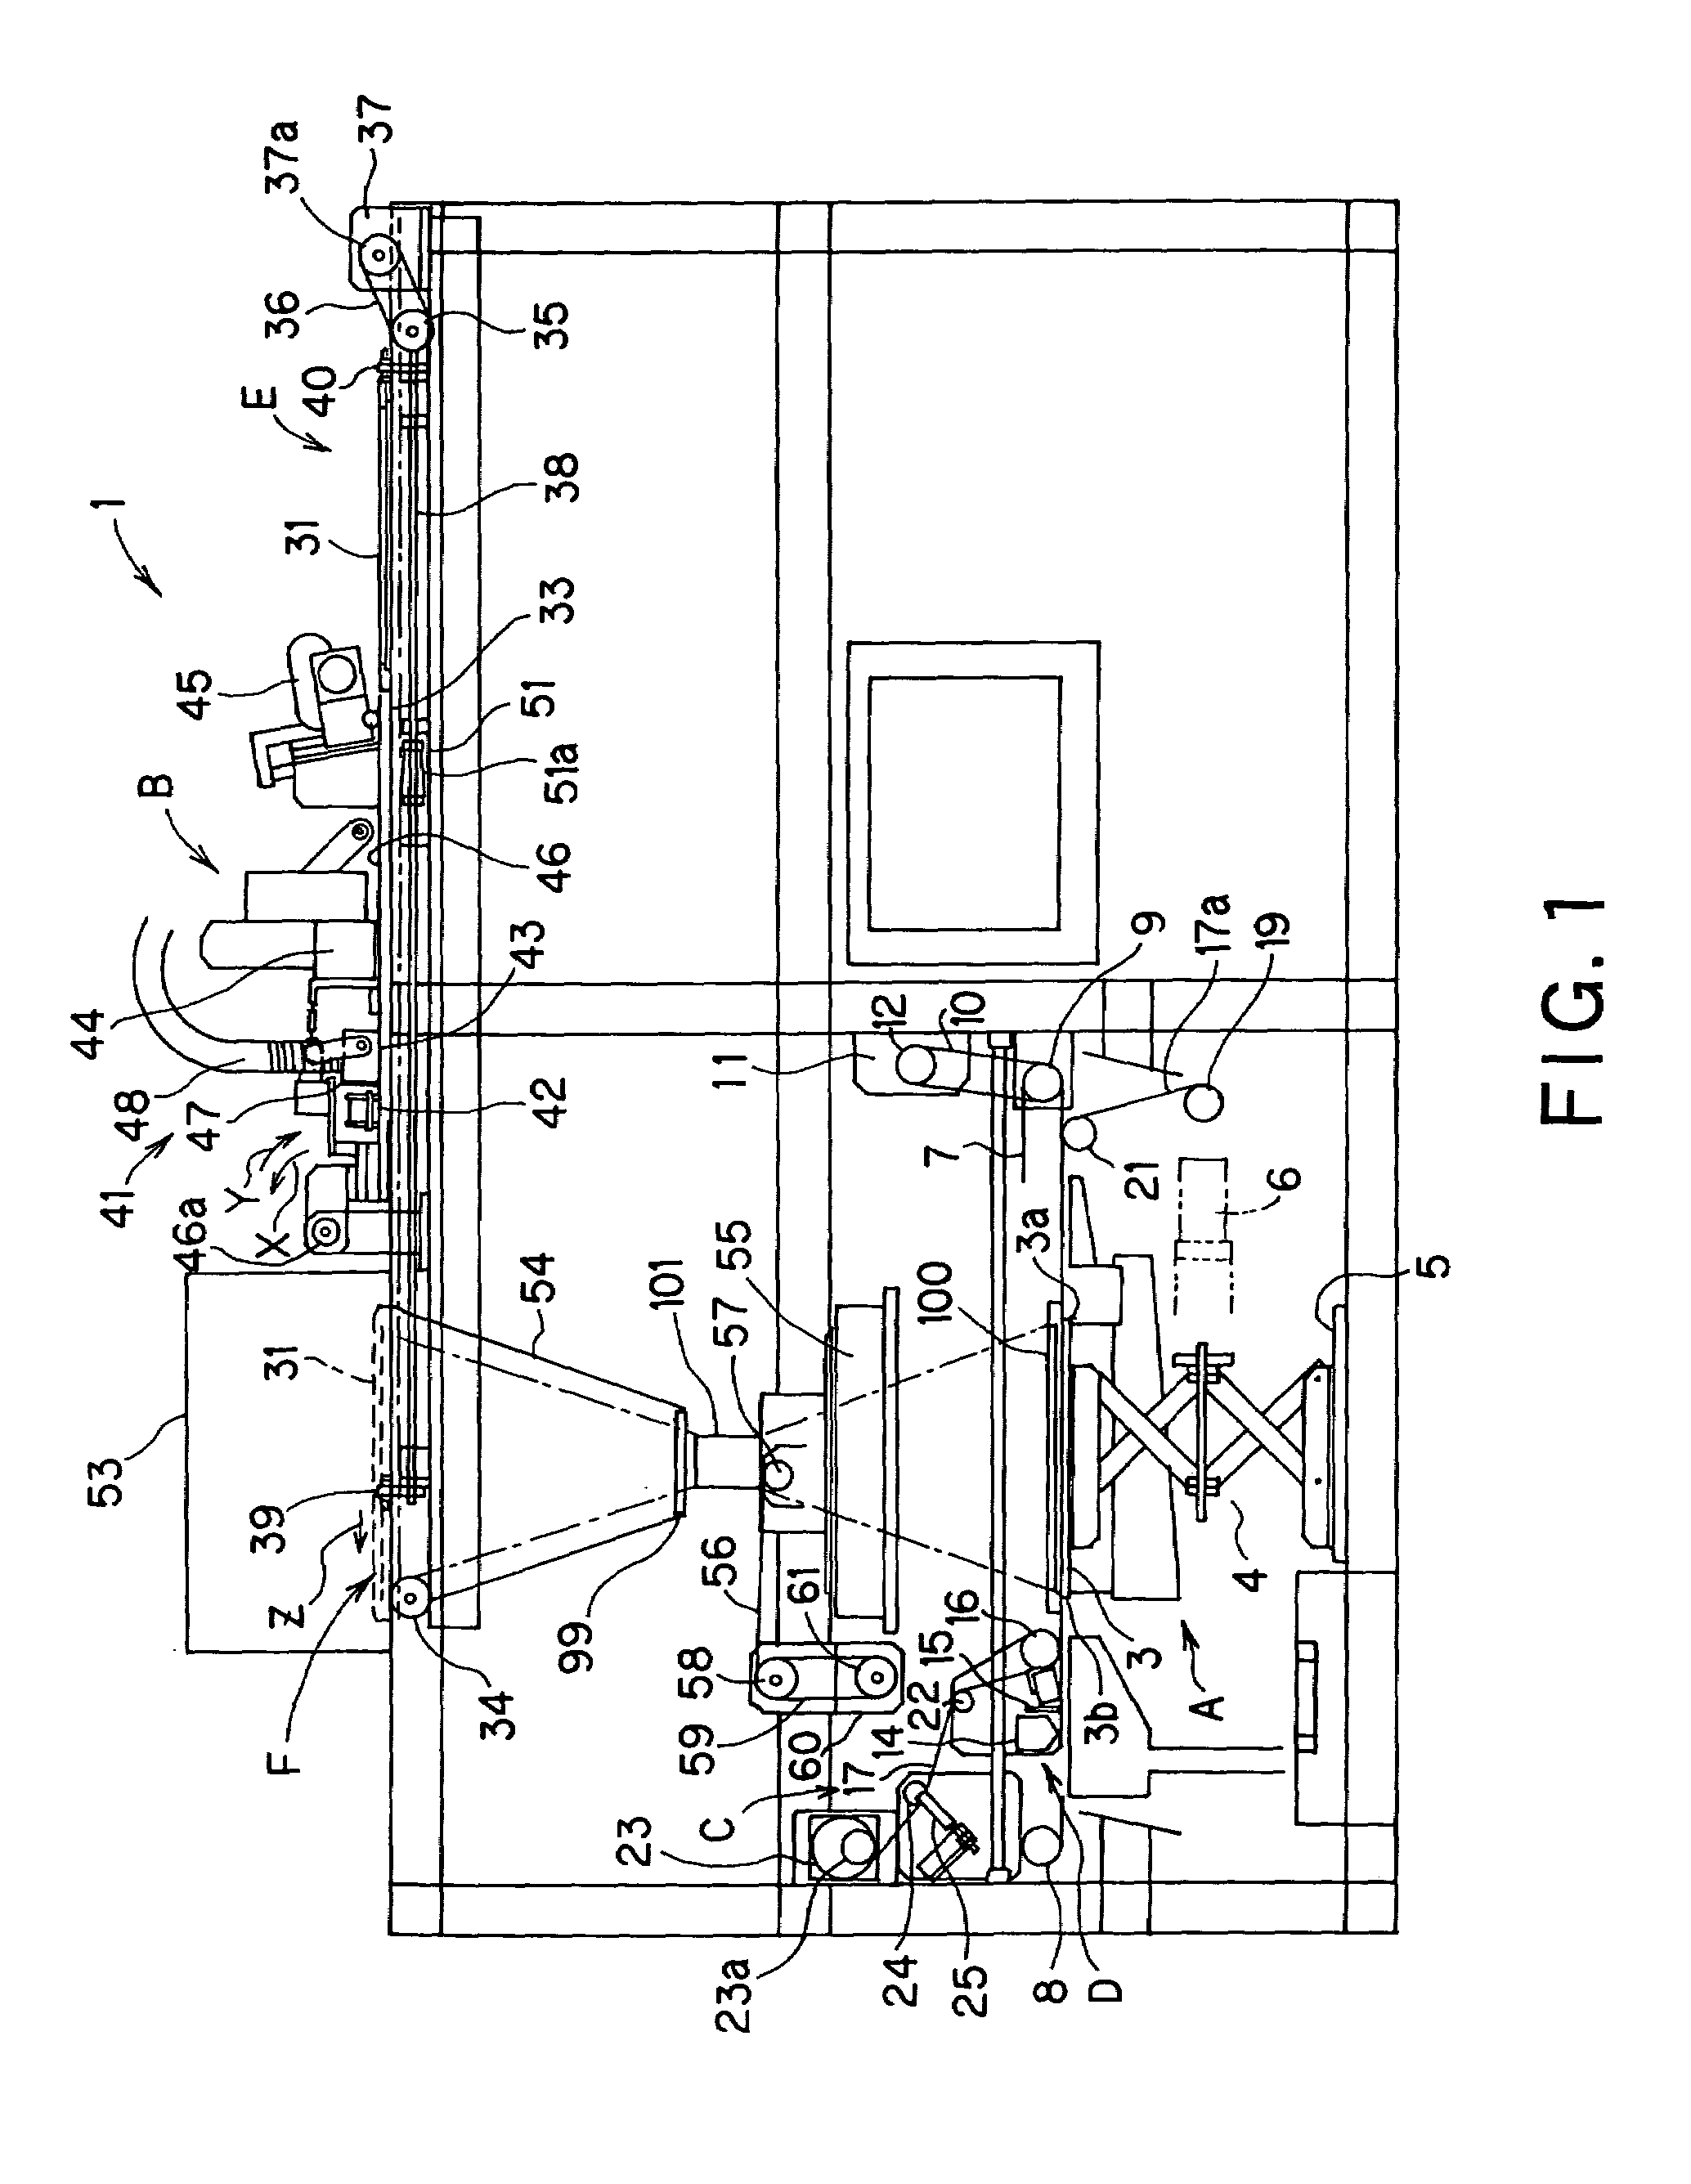 Stereolithographic apparatus and method for manufacturing three-dimensional object